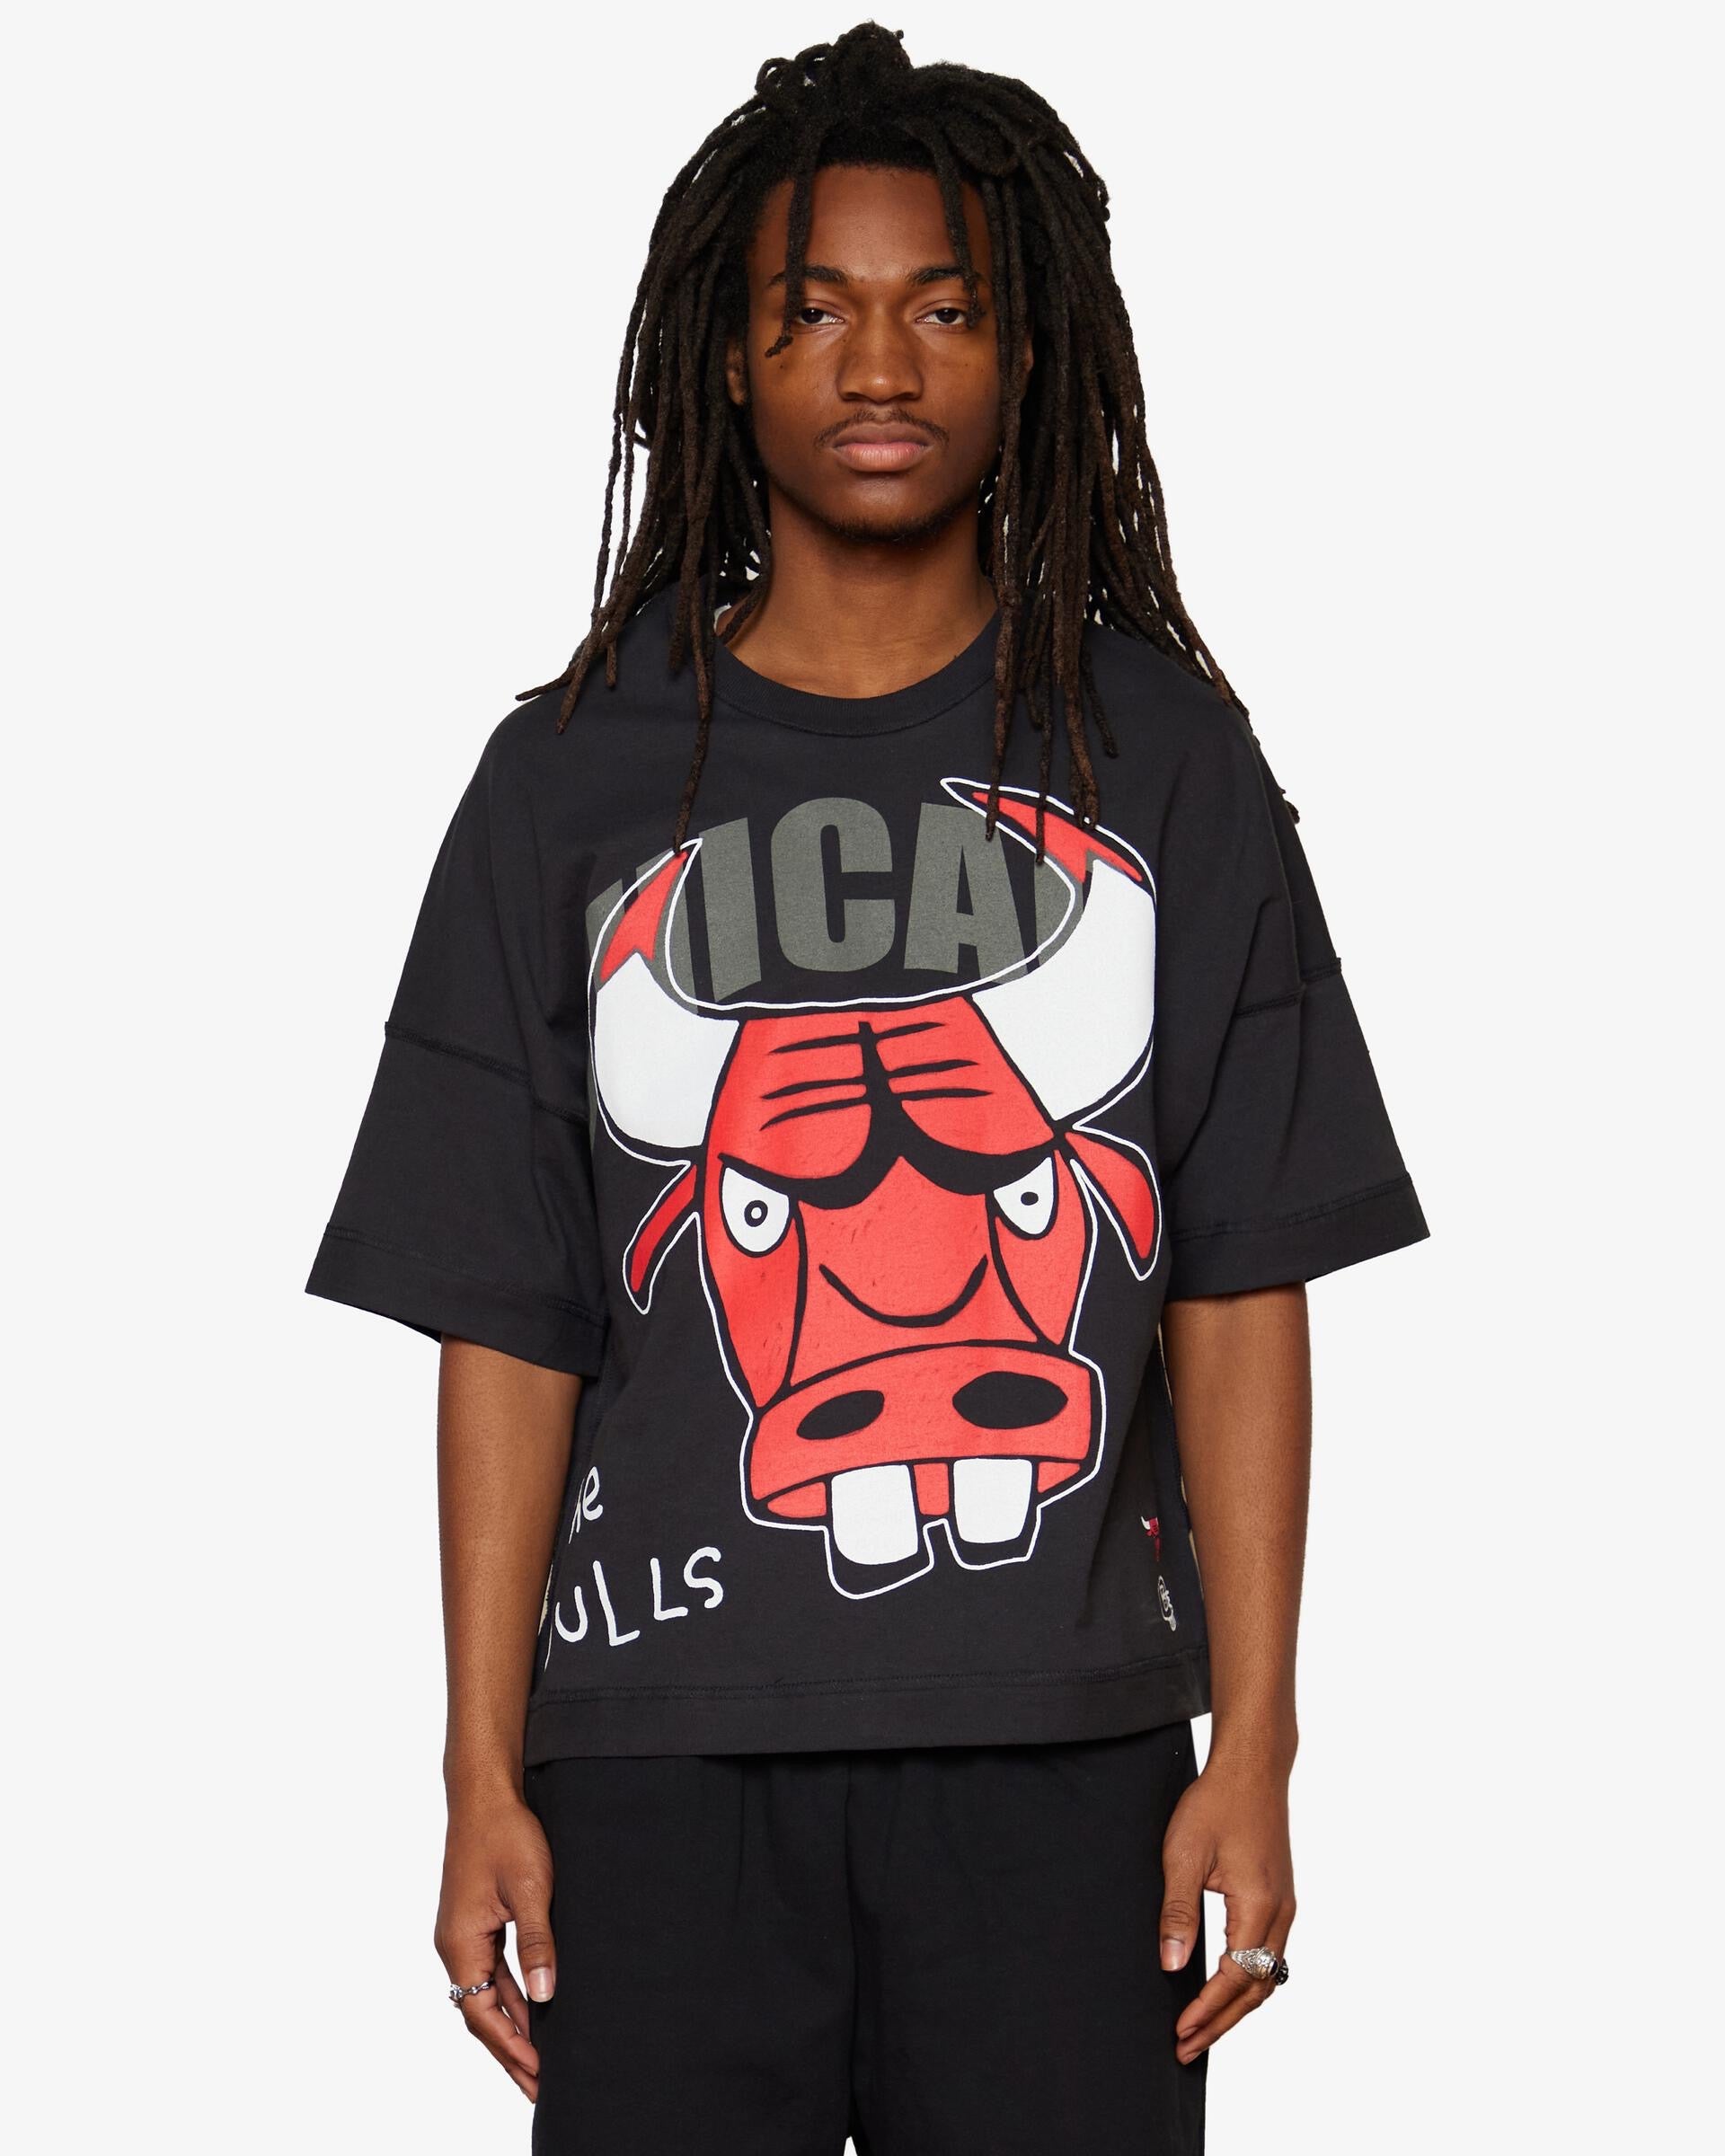 Back to School Special Chicago Bulls - Black